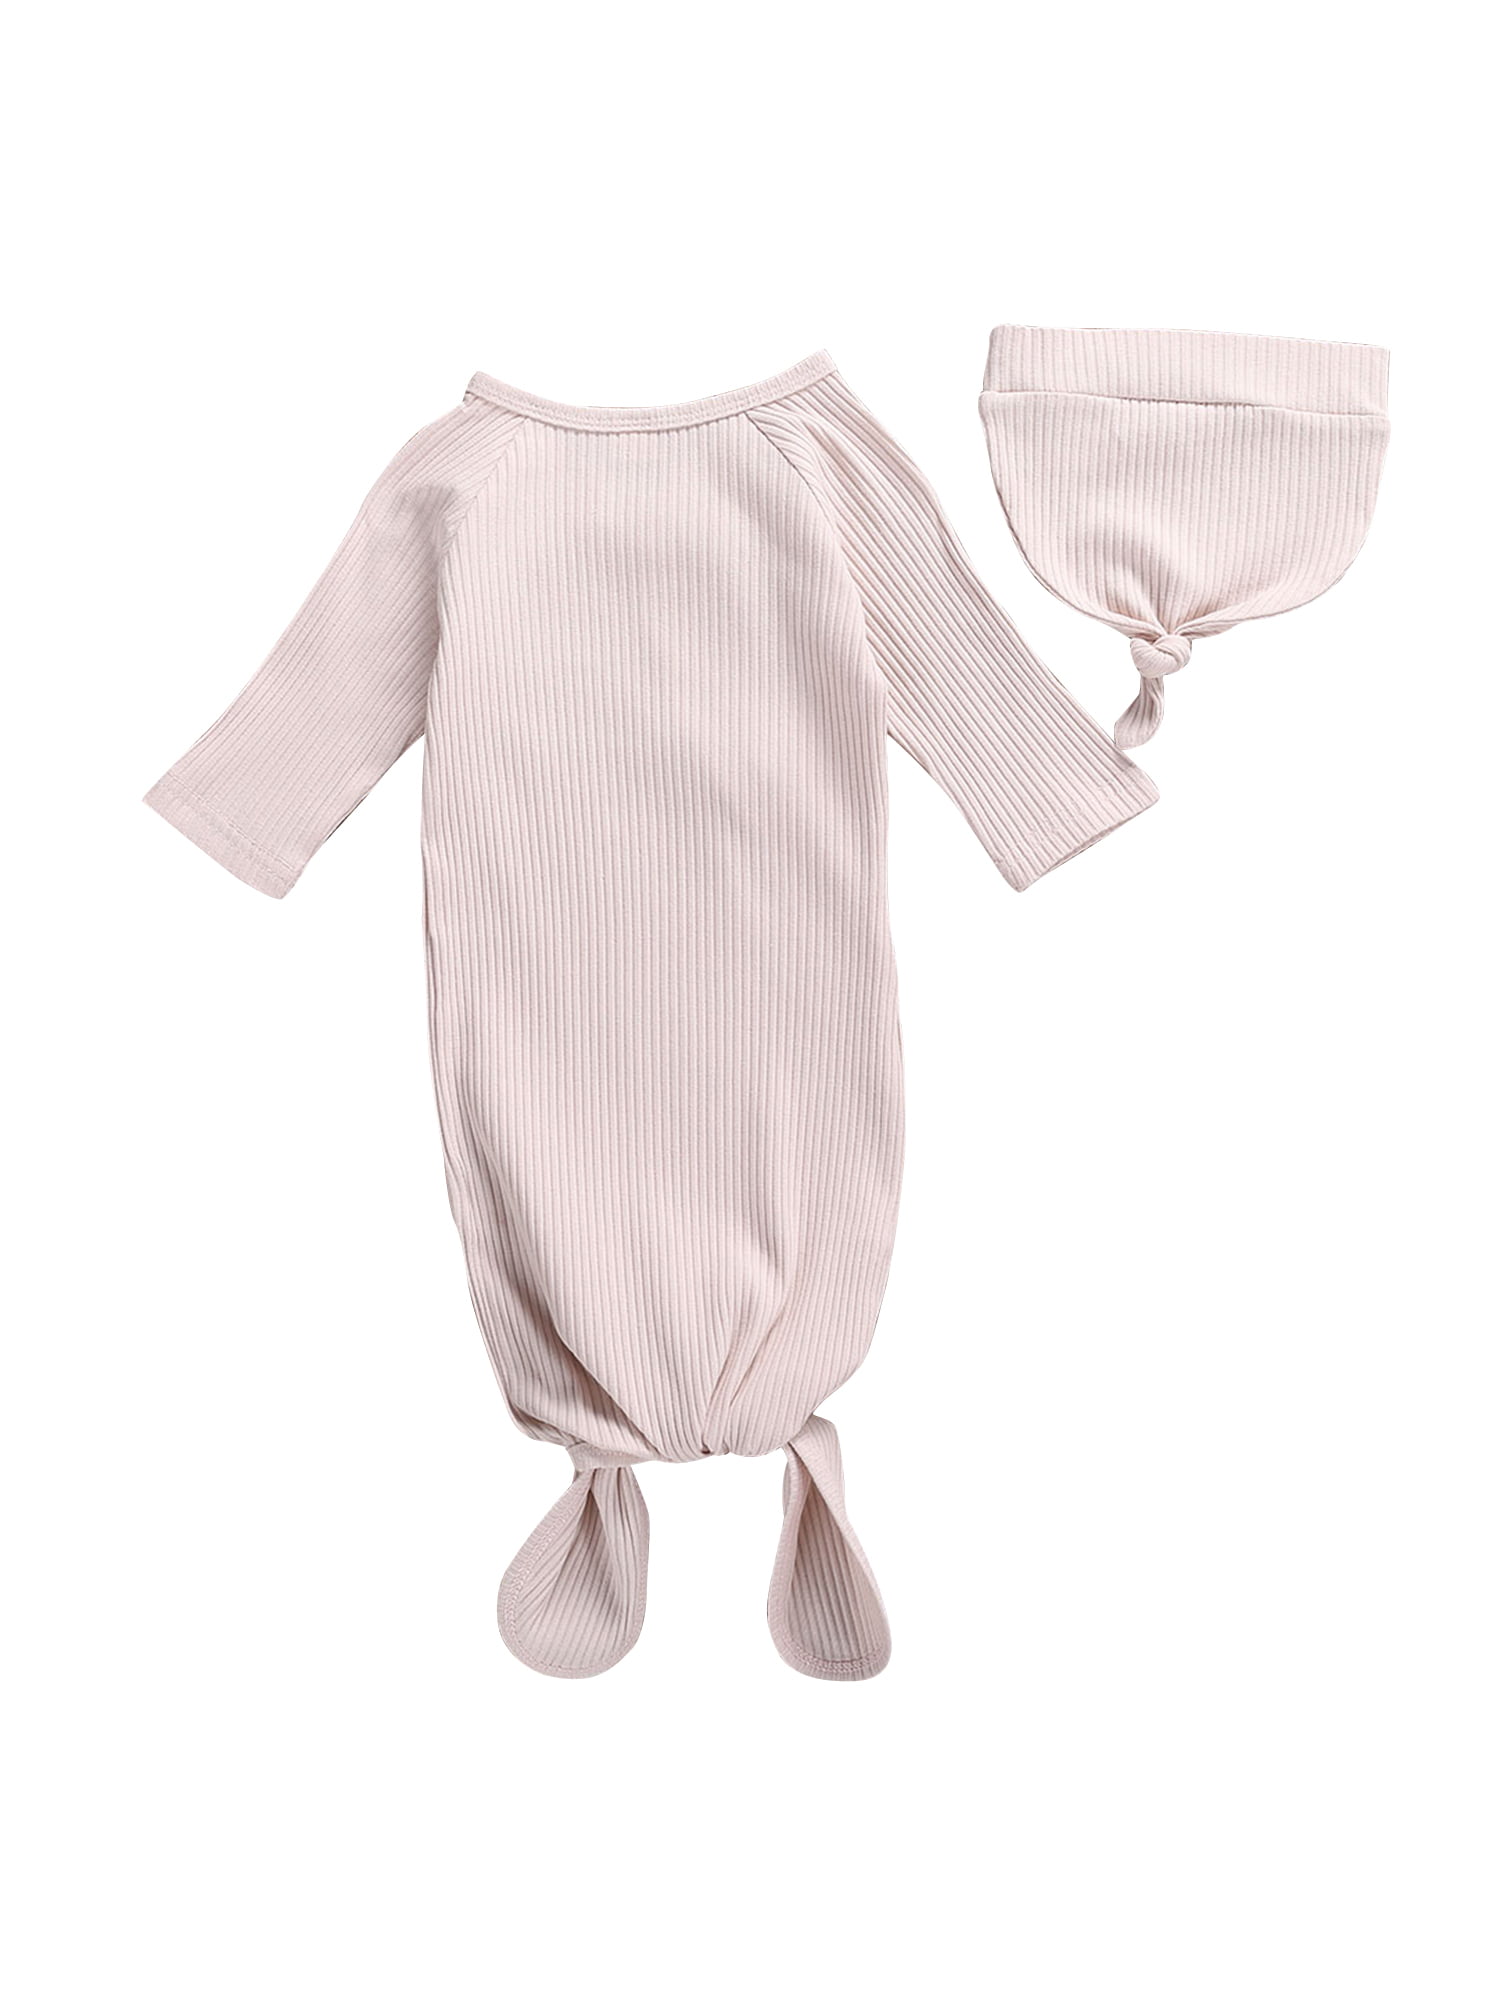 Baby Gowns Newborn Knotted Cotton Nightgowns Newborn Baby Sleeper Gown for Girls and Boys